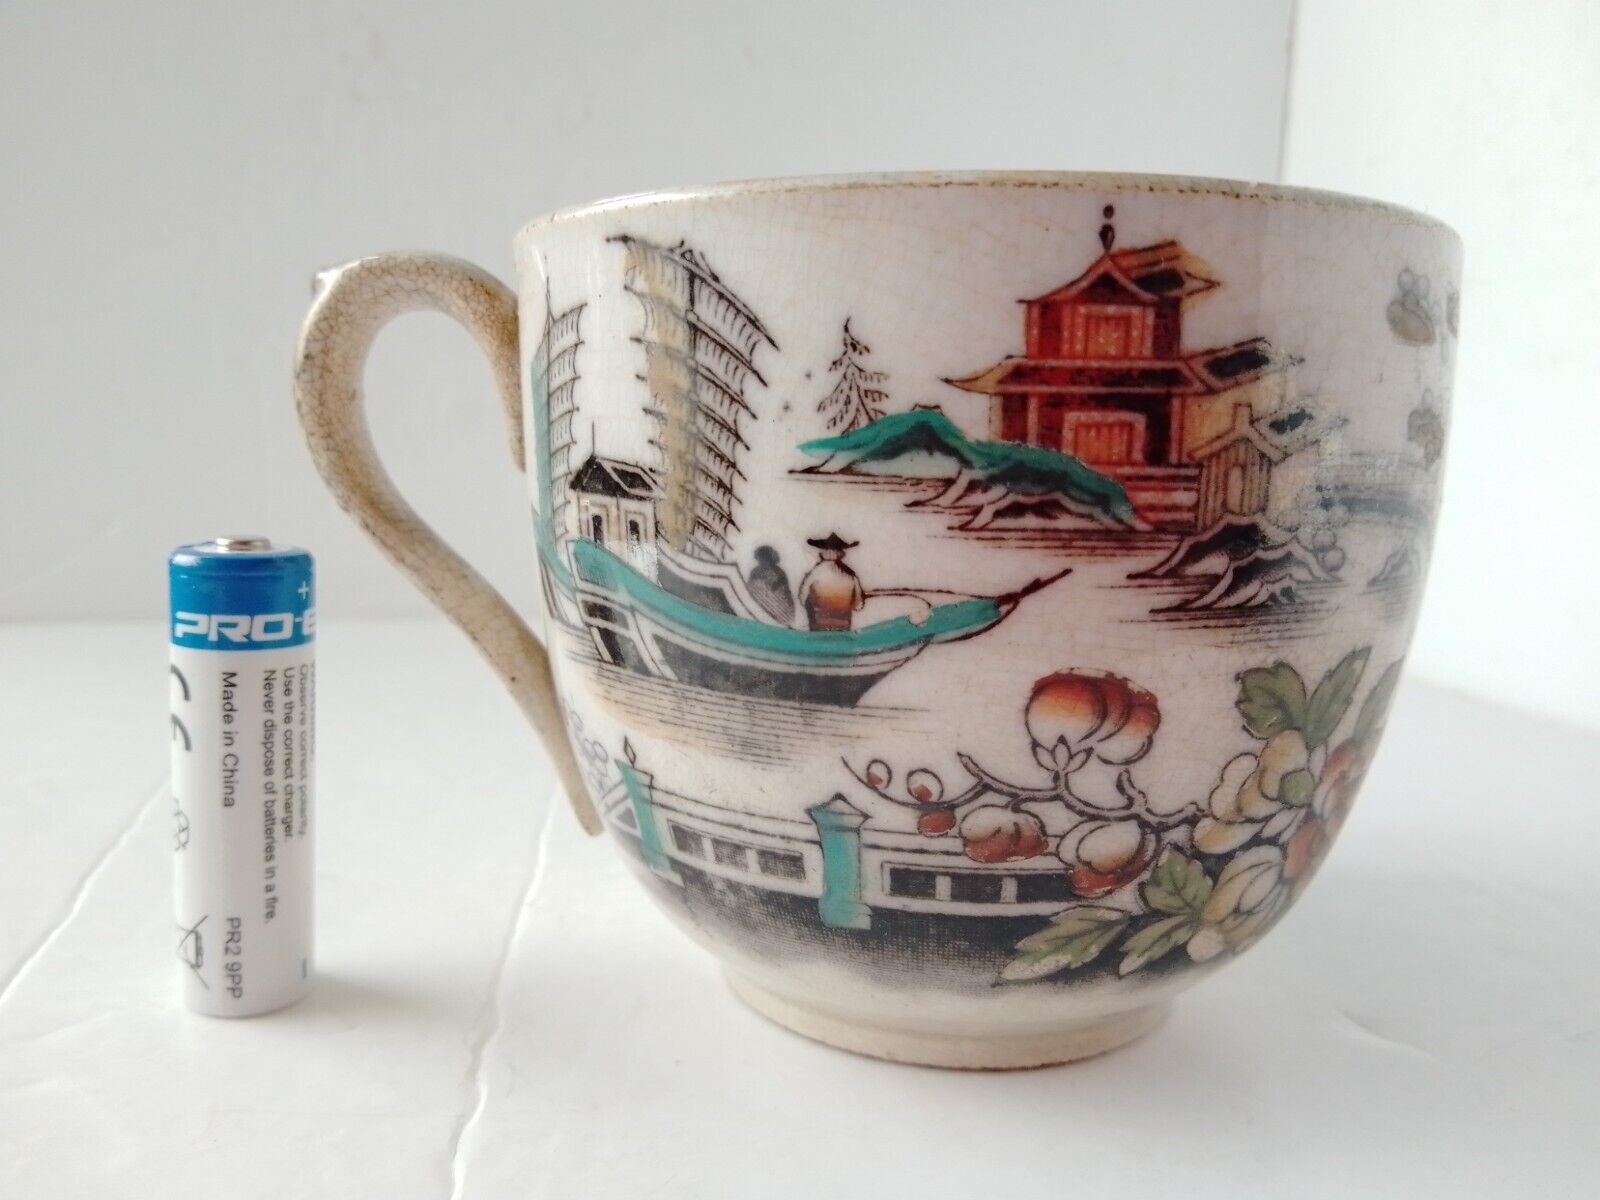 Antique Valuations: 19c English Chinoiserie Large Teacup Stoneware Transfer Print